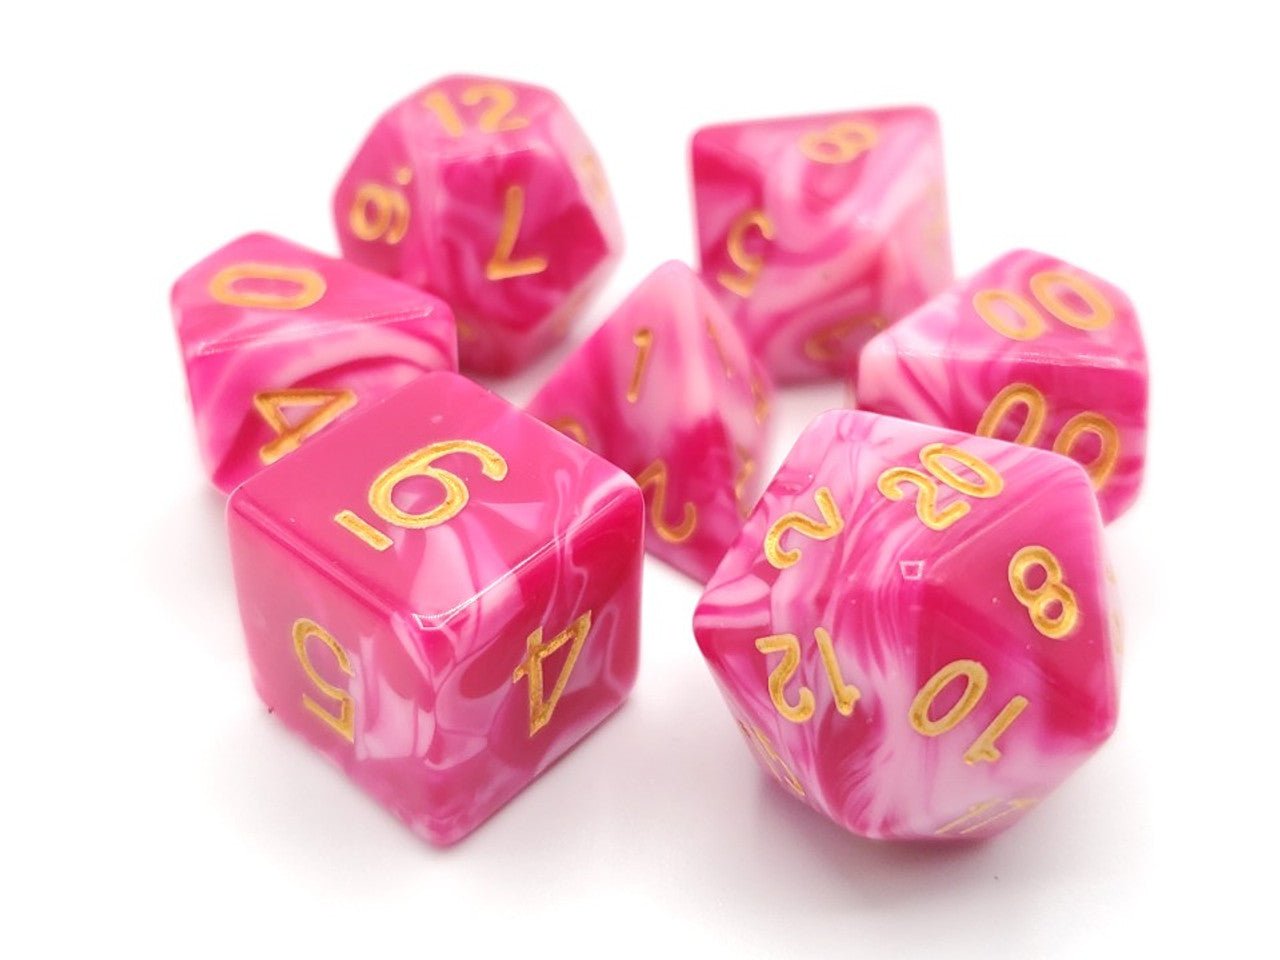 Old School Dice: 7 Die Set - Vorpal - Rose Red & White with Gold - Gamescape